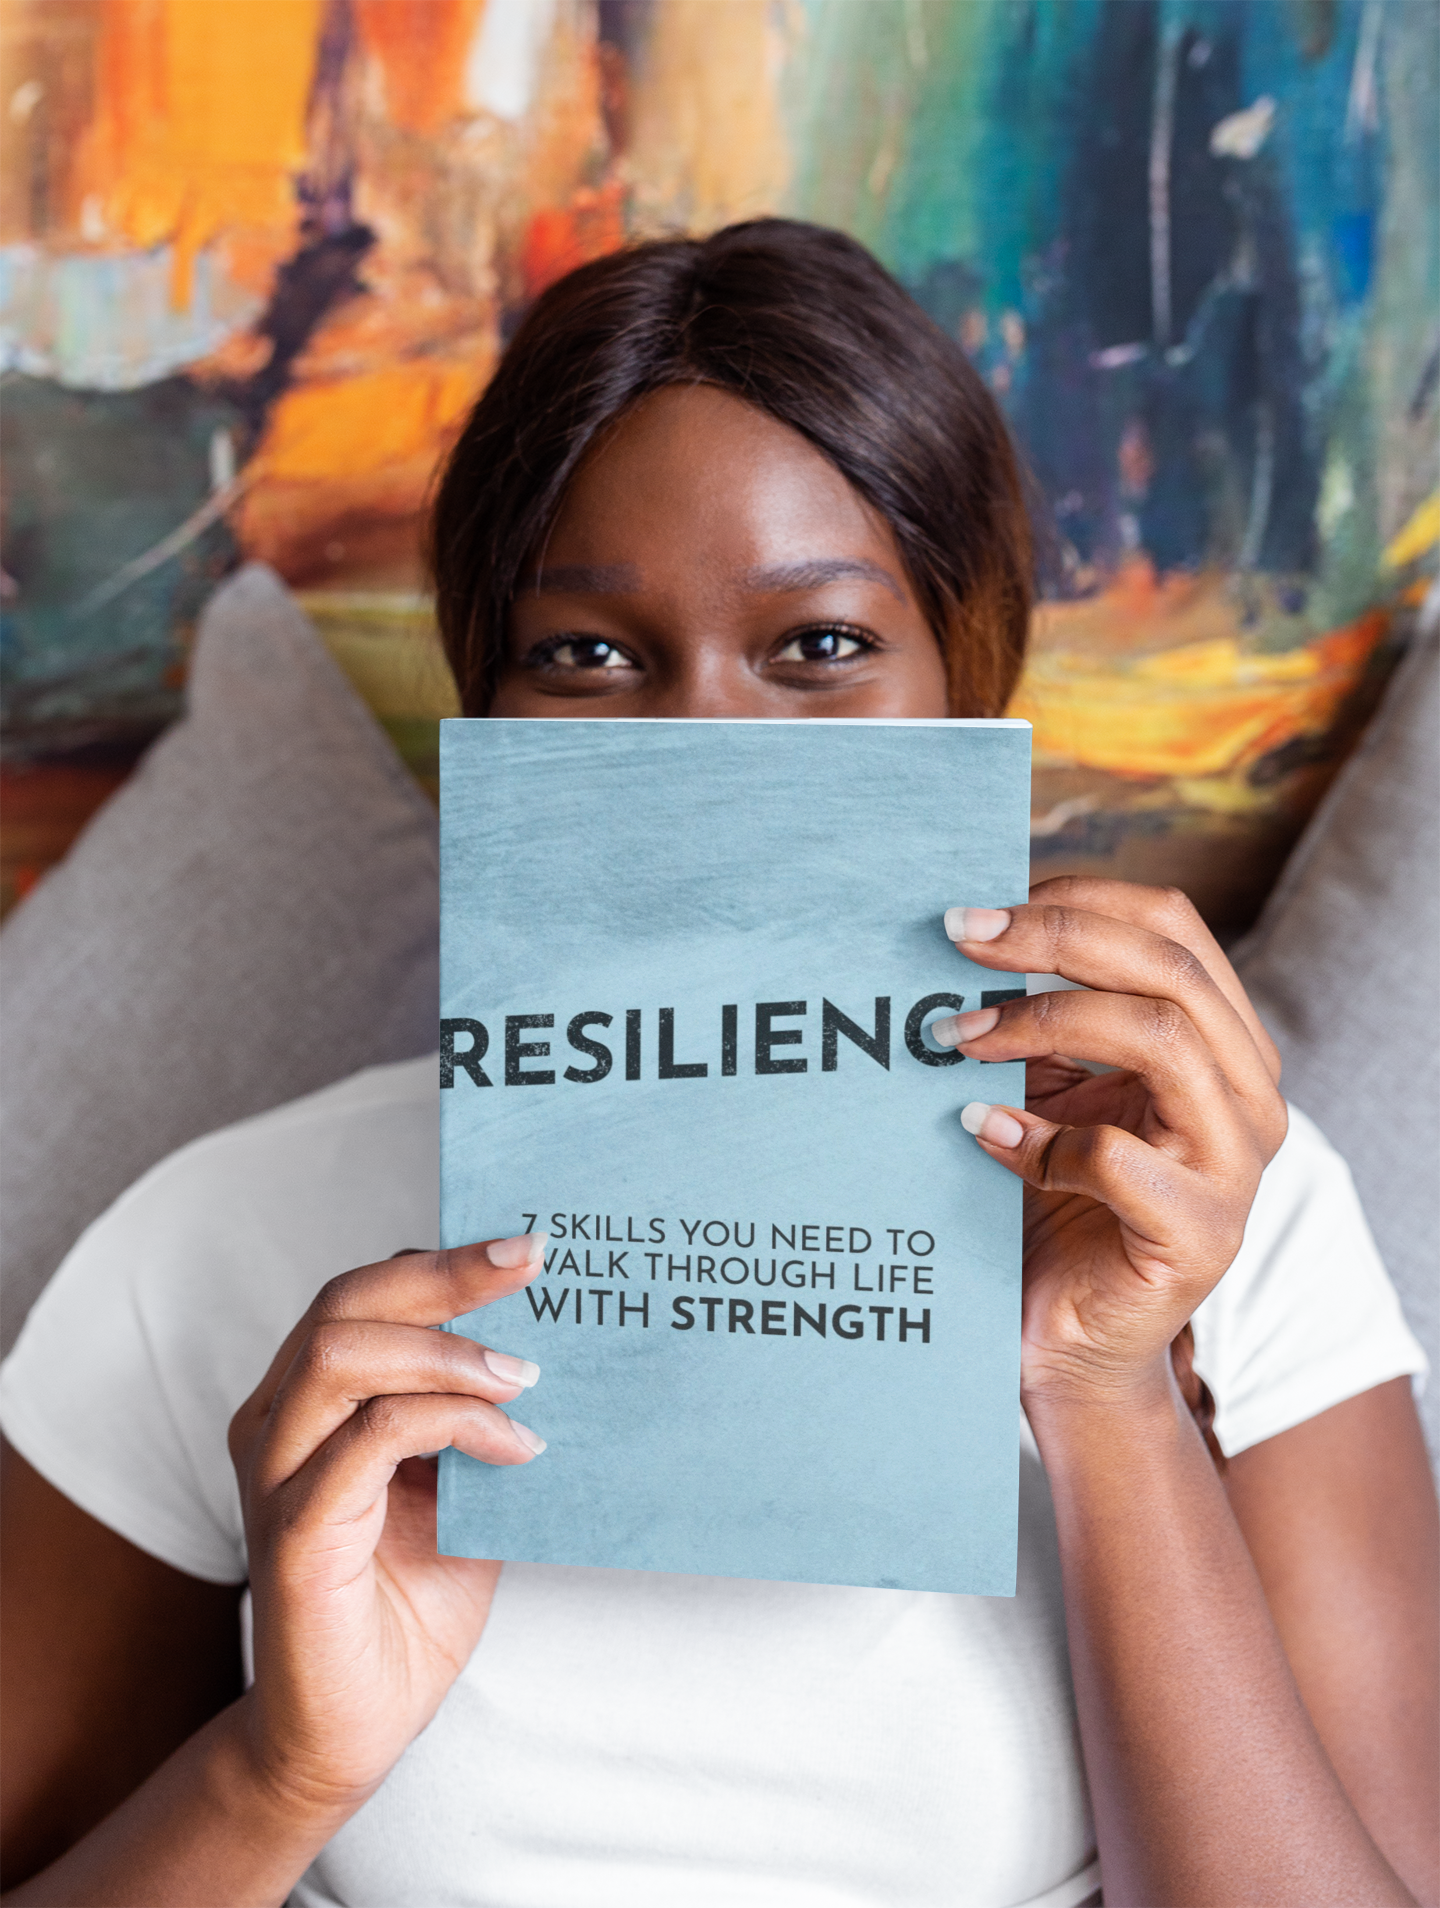 Resilience: 7 Skills You Need to Walk Through Life With Strength eBook Bundle